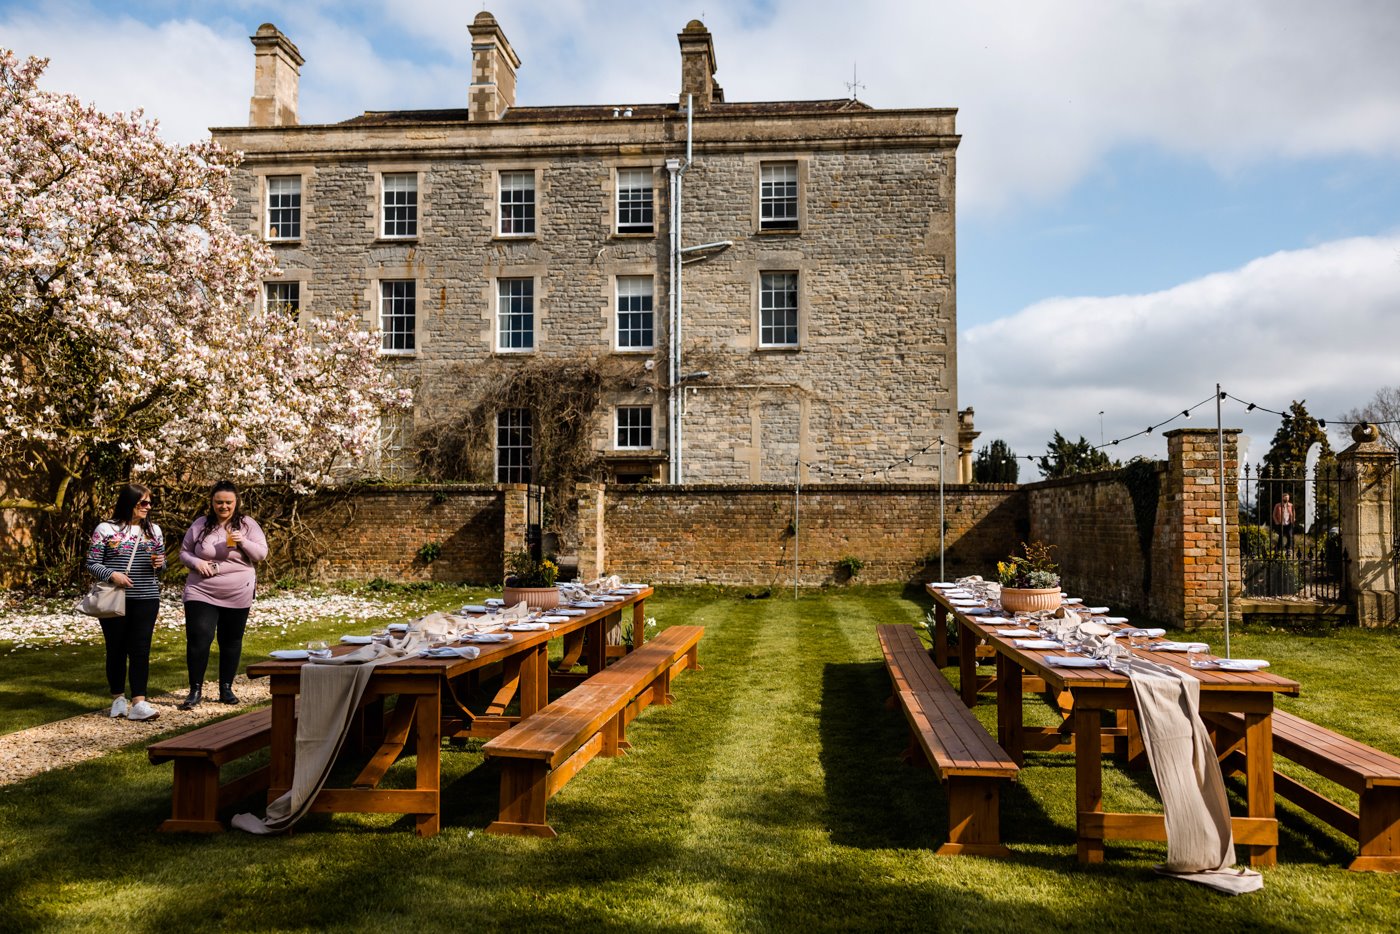 Outdoor wedding dining benches set up next to magnolia tree in the walled garden of stately home wedding venue Elmore Court for a wild wedding fair in 2022